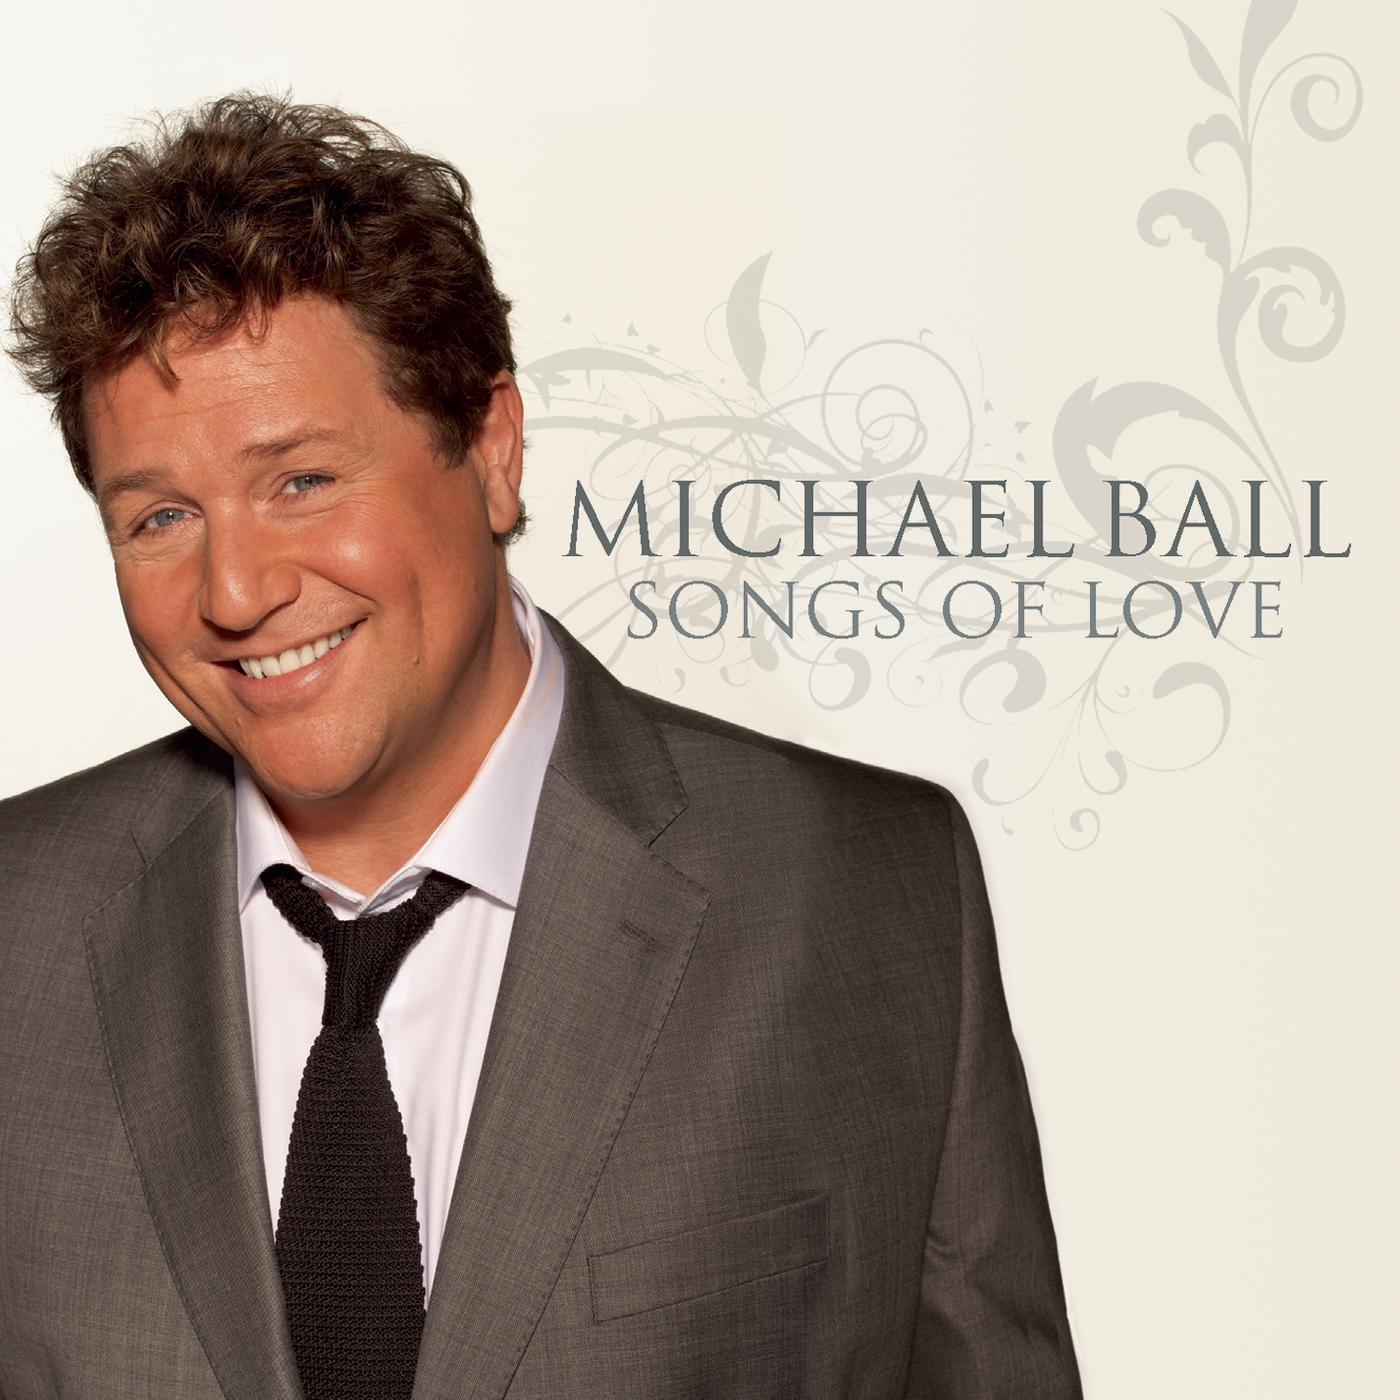 Michael Ball - She's Not There (Album Version)